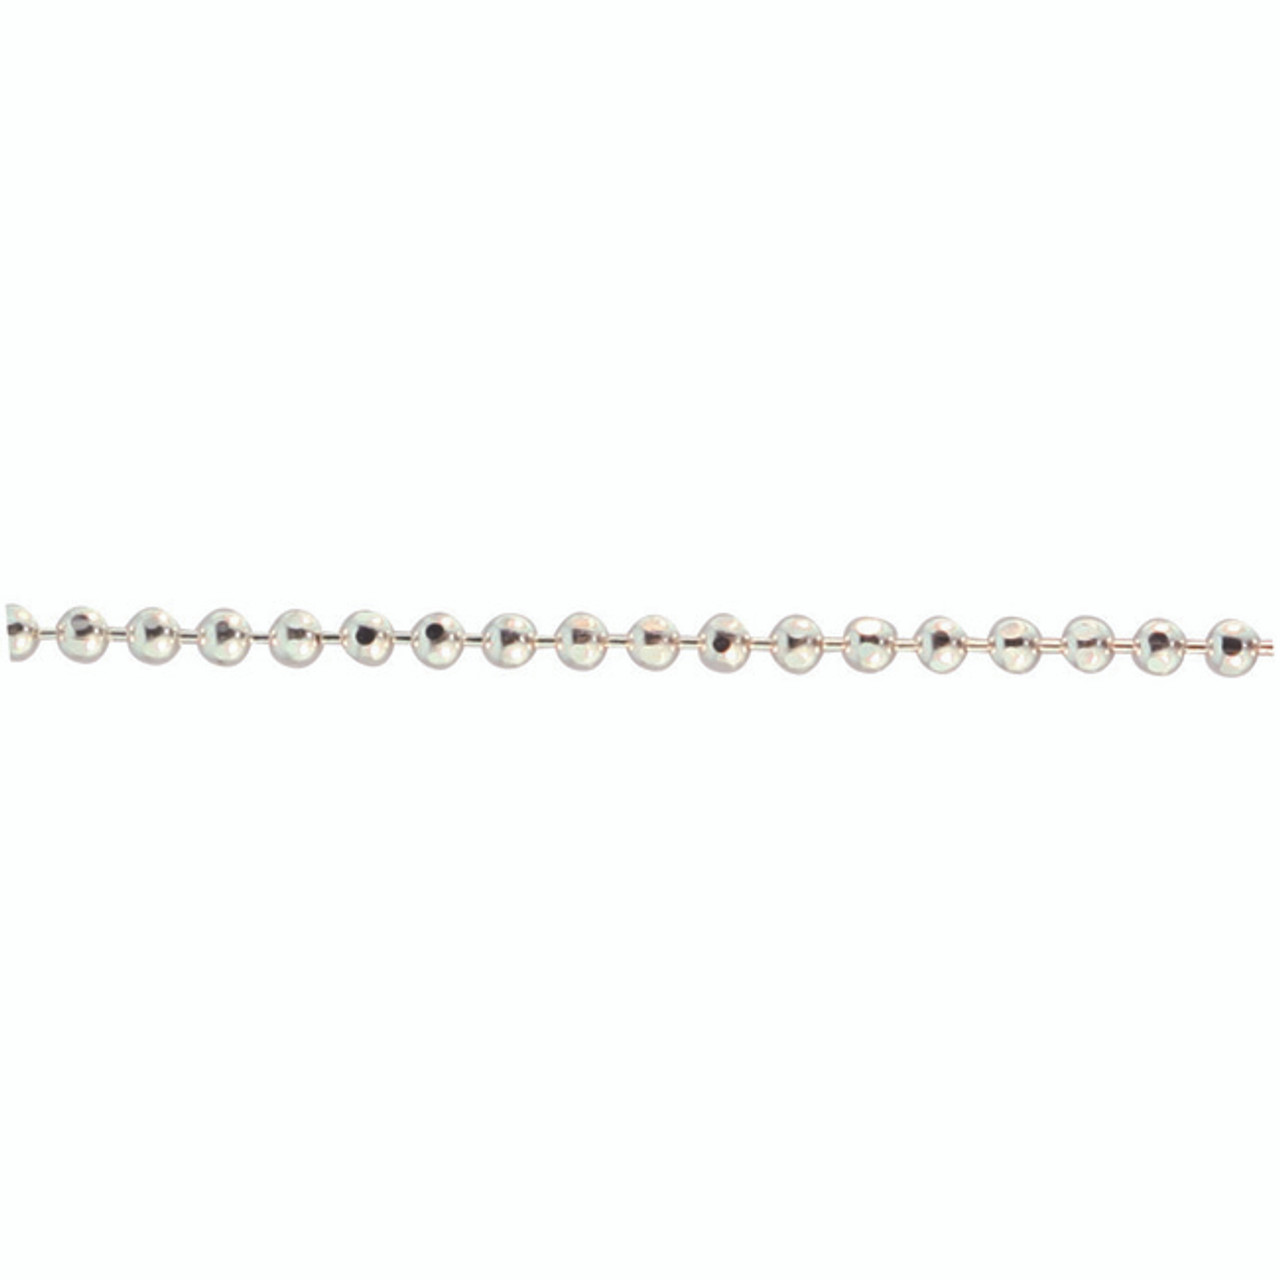 Tiny Sparkly Ball Chain Sterling Silver Interchangeable for Charms